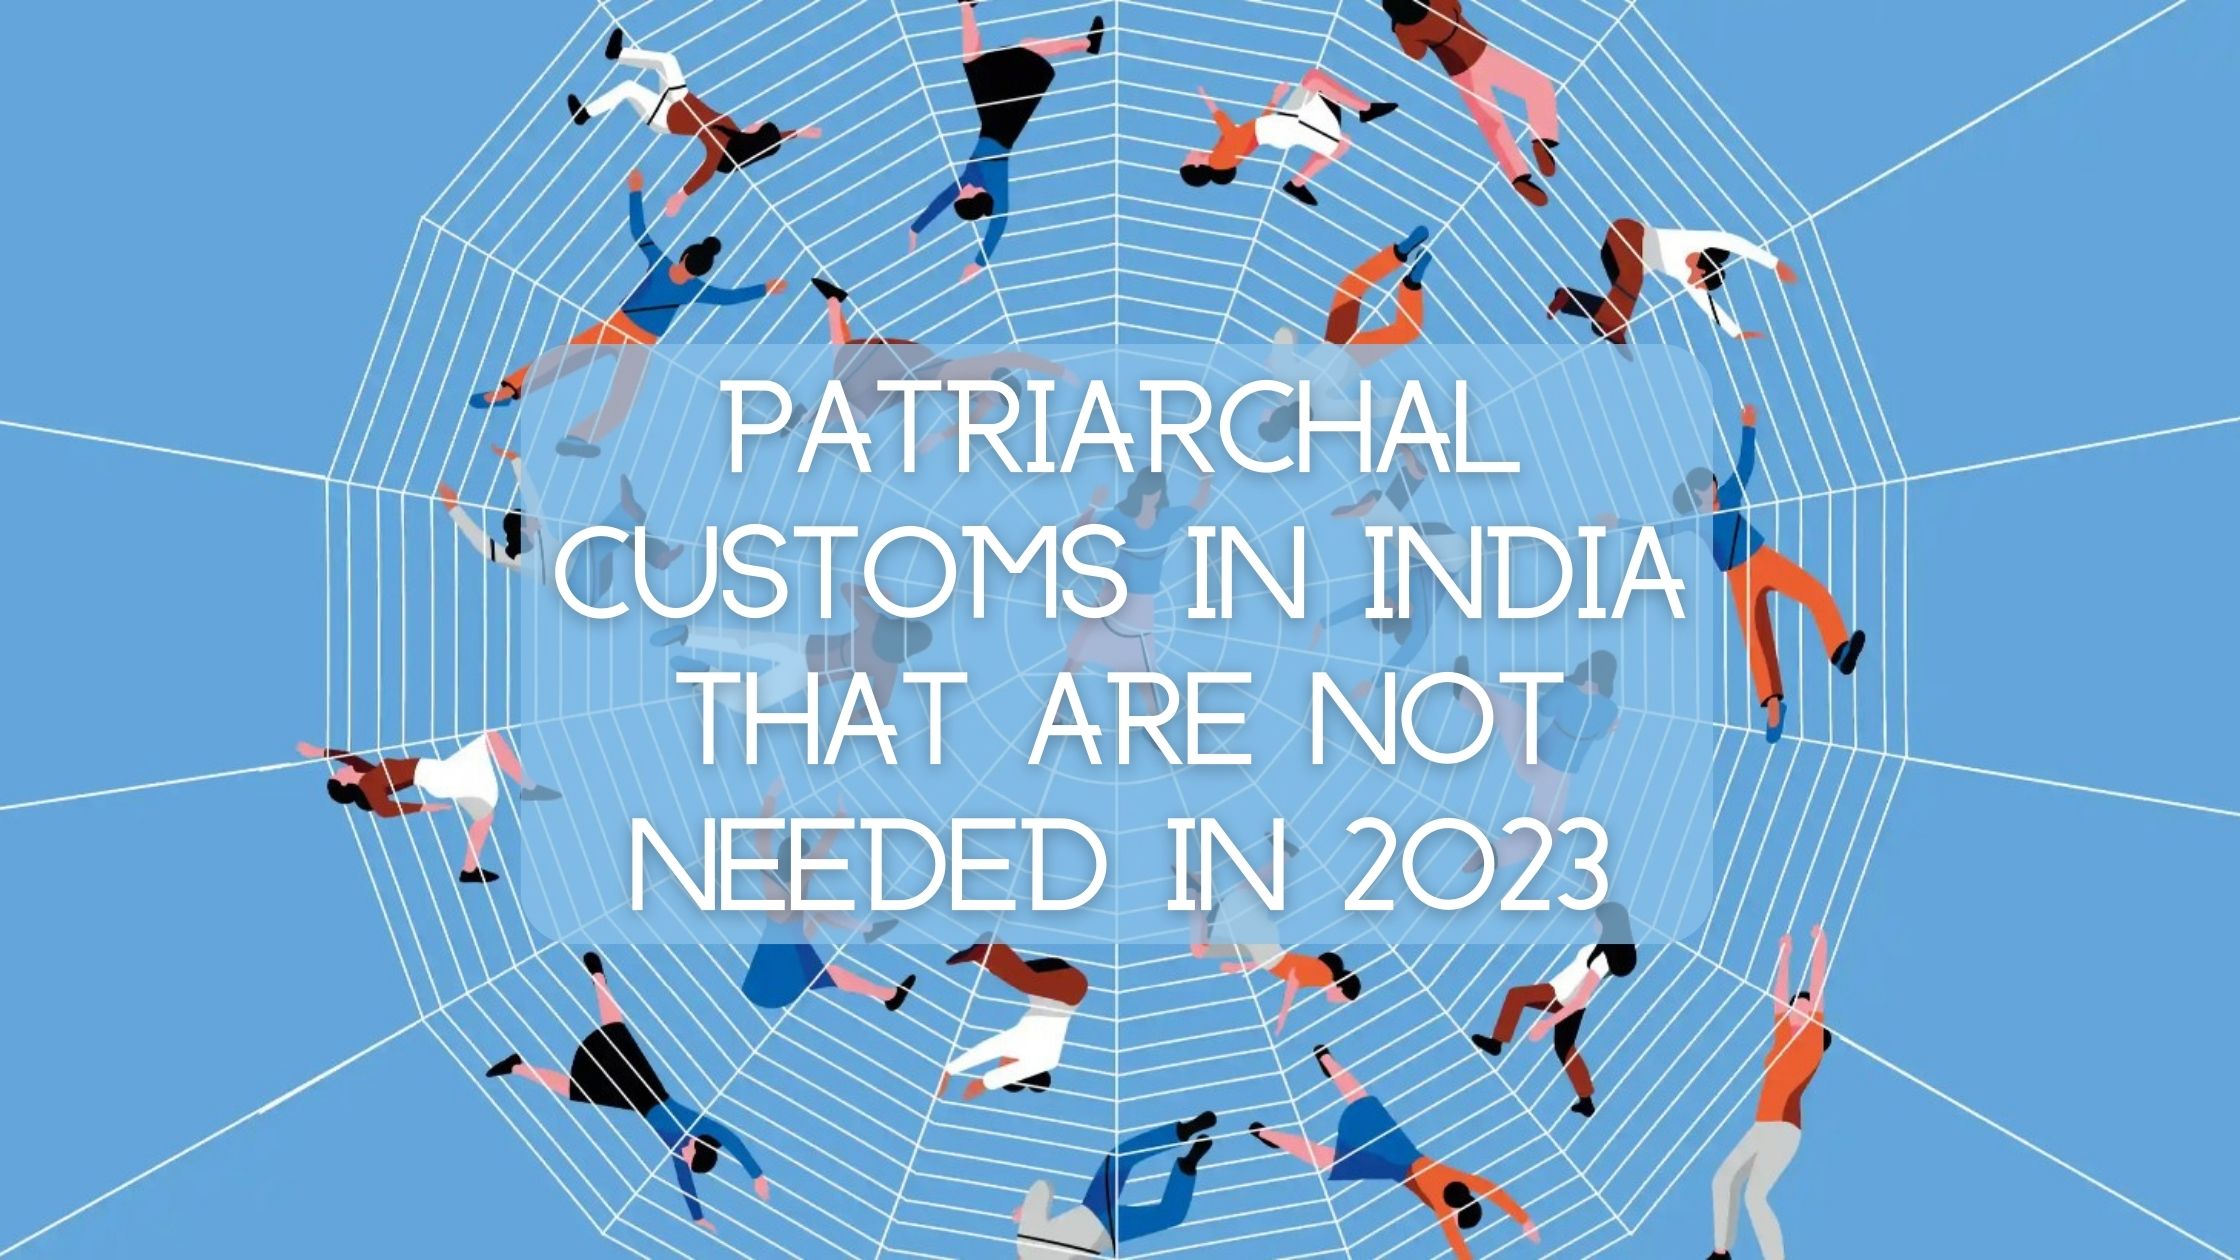 Patriarchal customs in India that are not needed in 2023